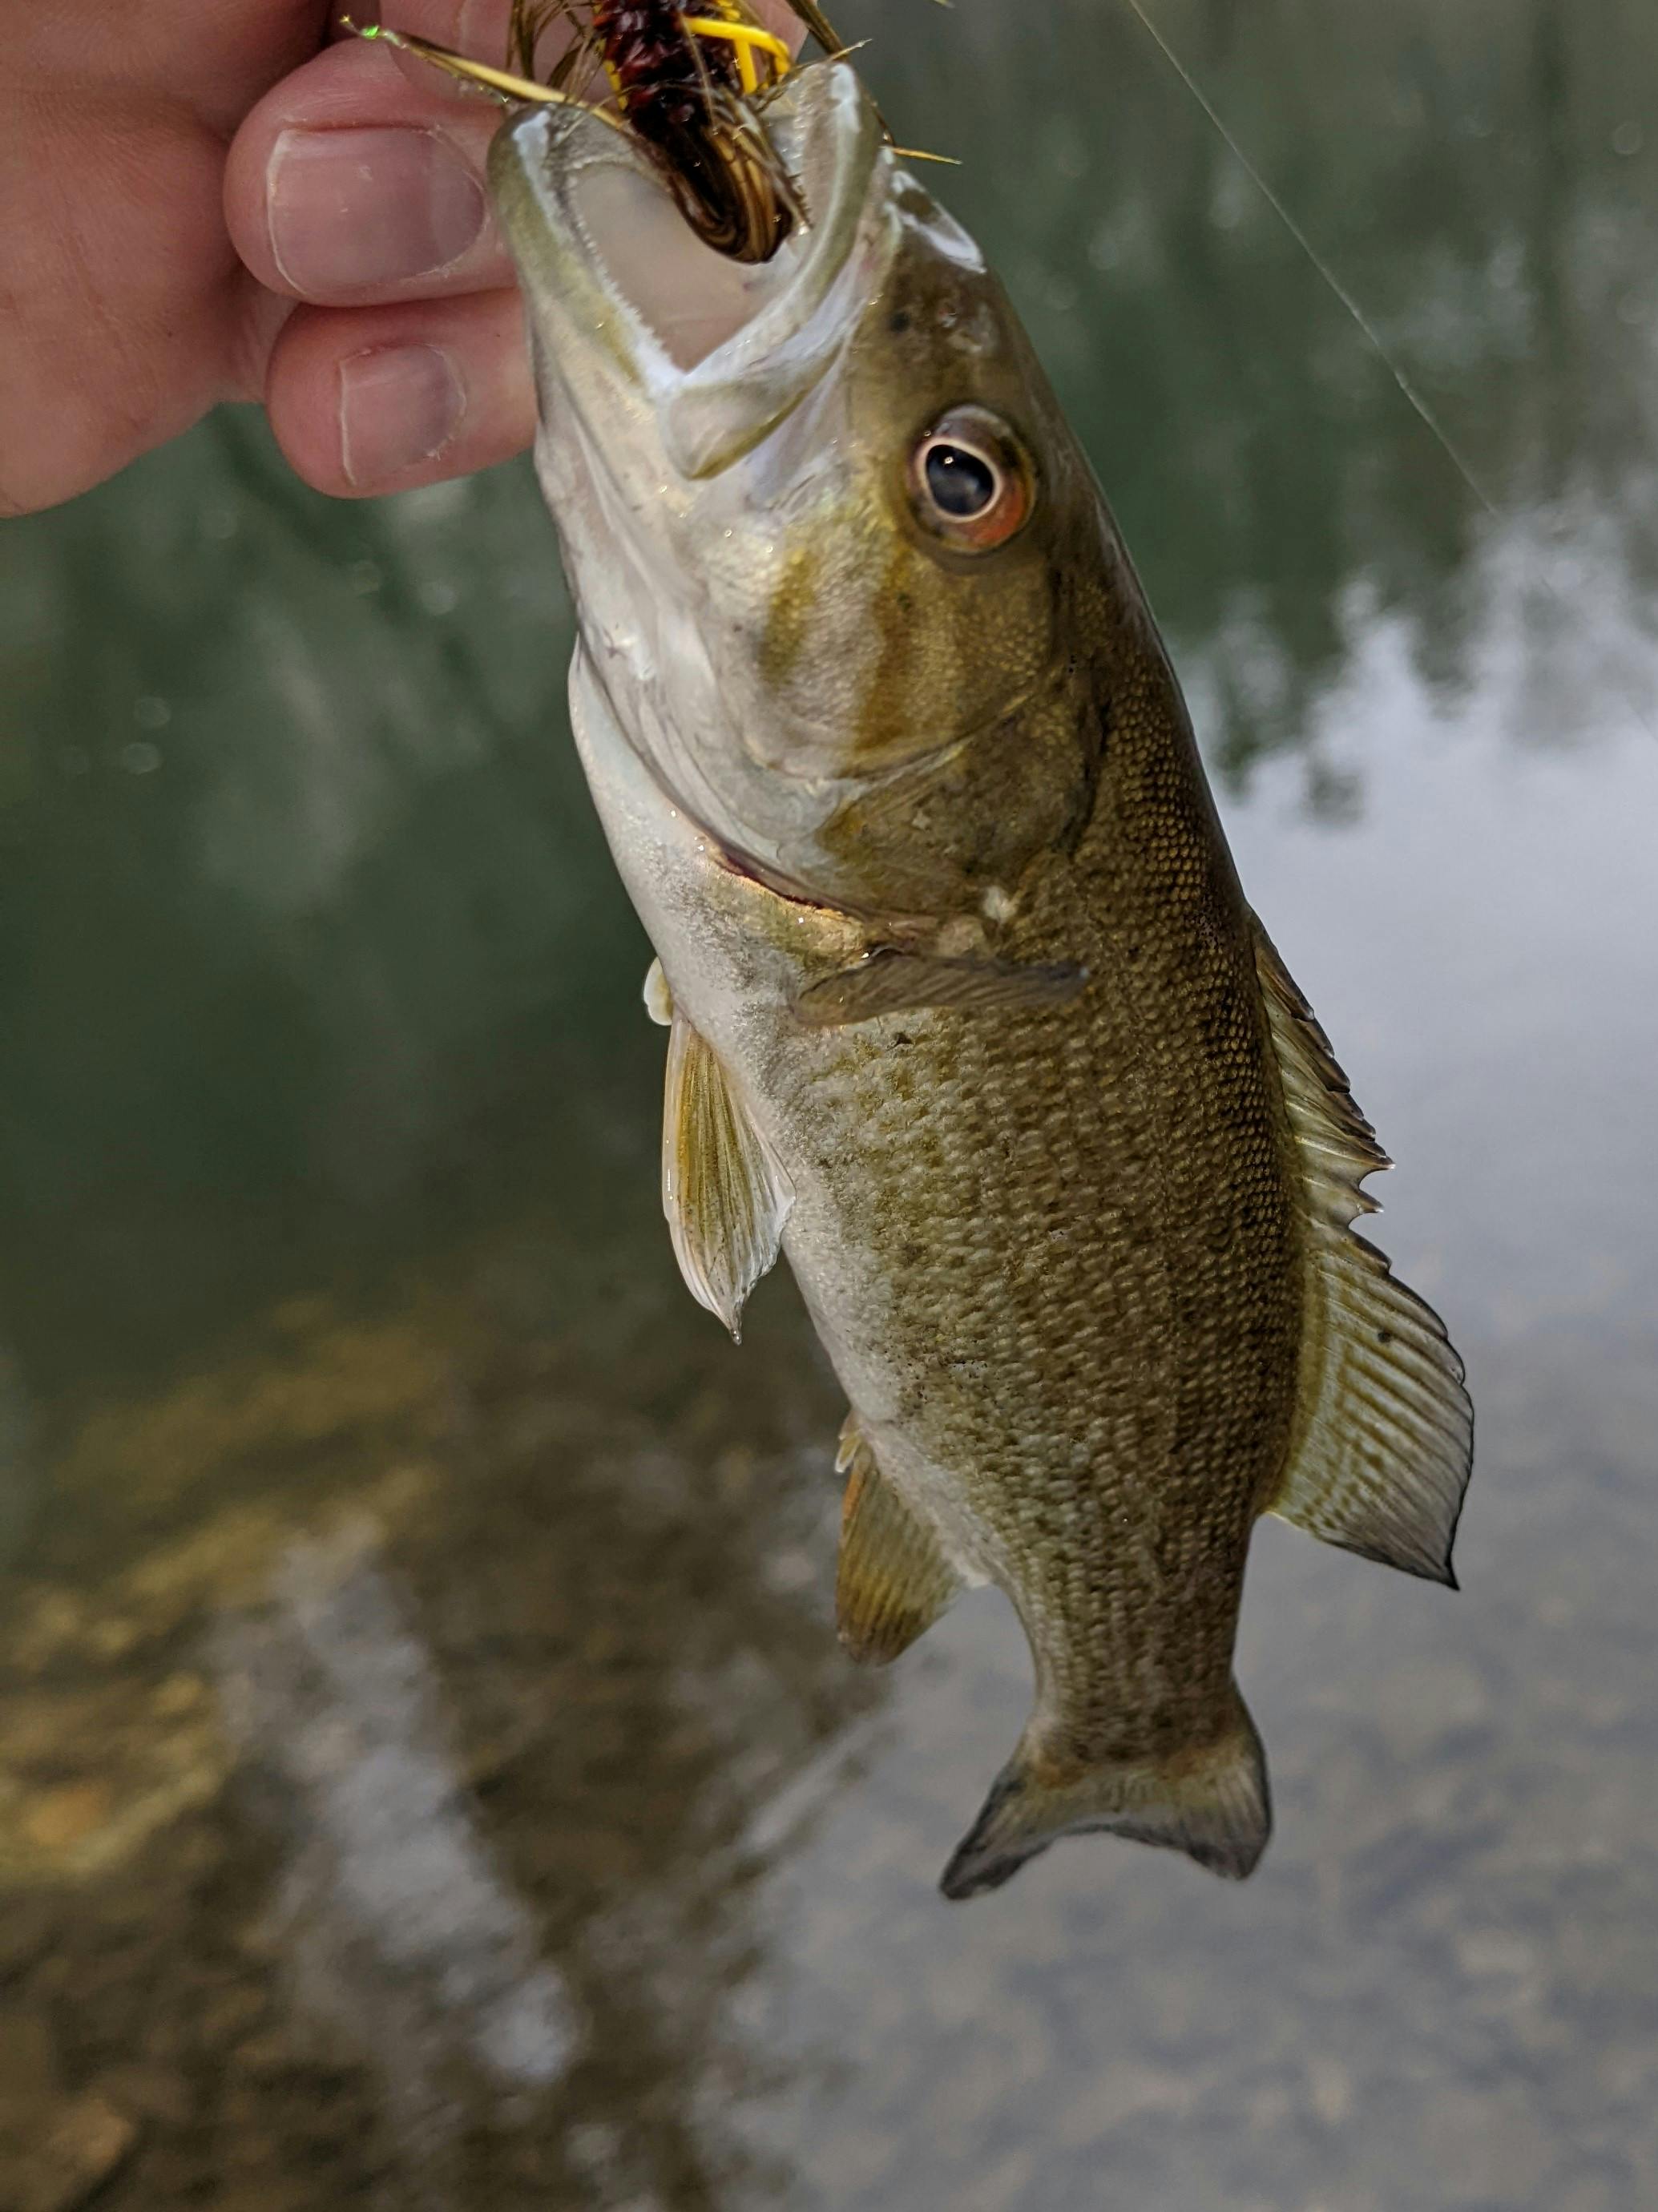 A Smallmouth bass caught on the Lamson Litespeed F Fly Reel.